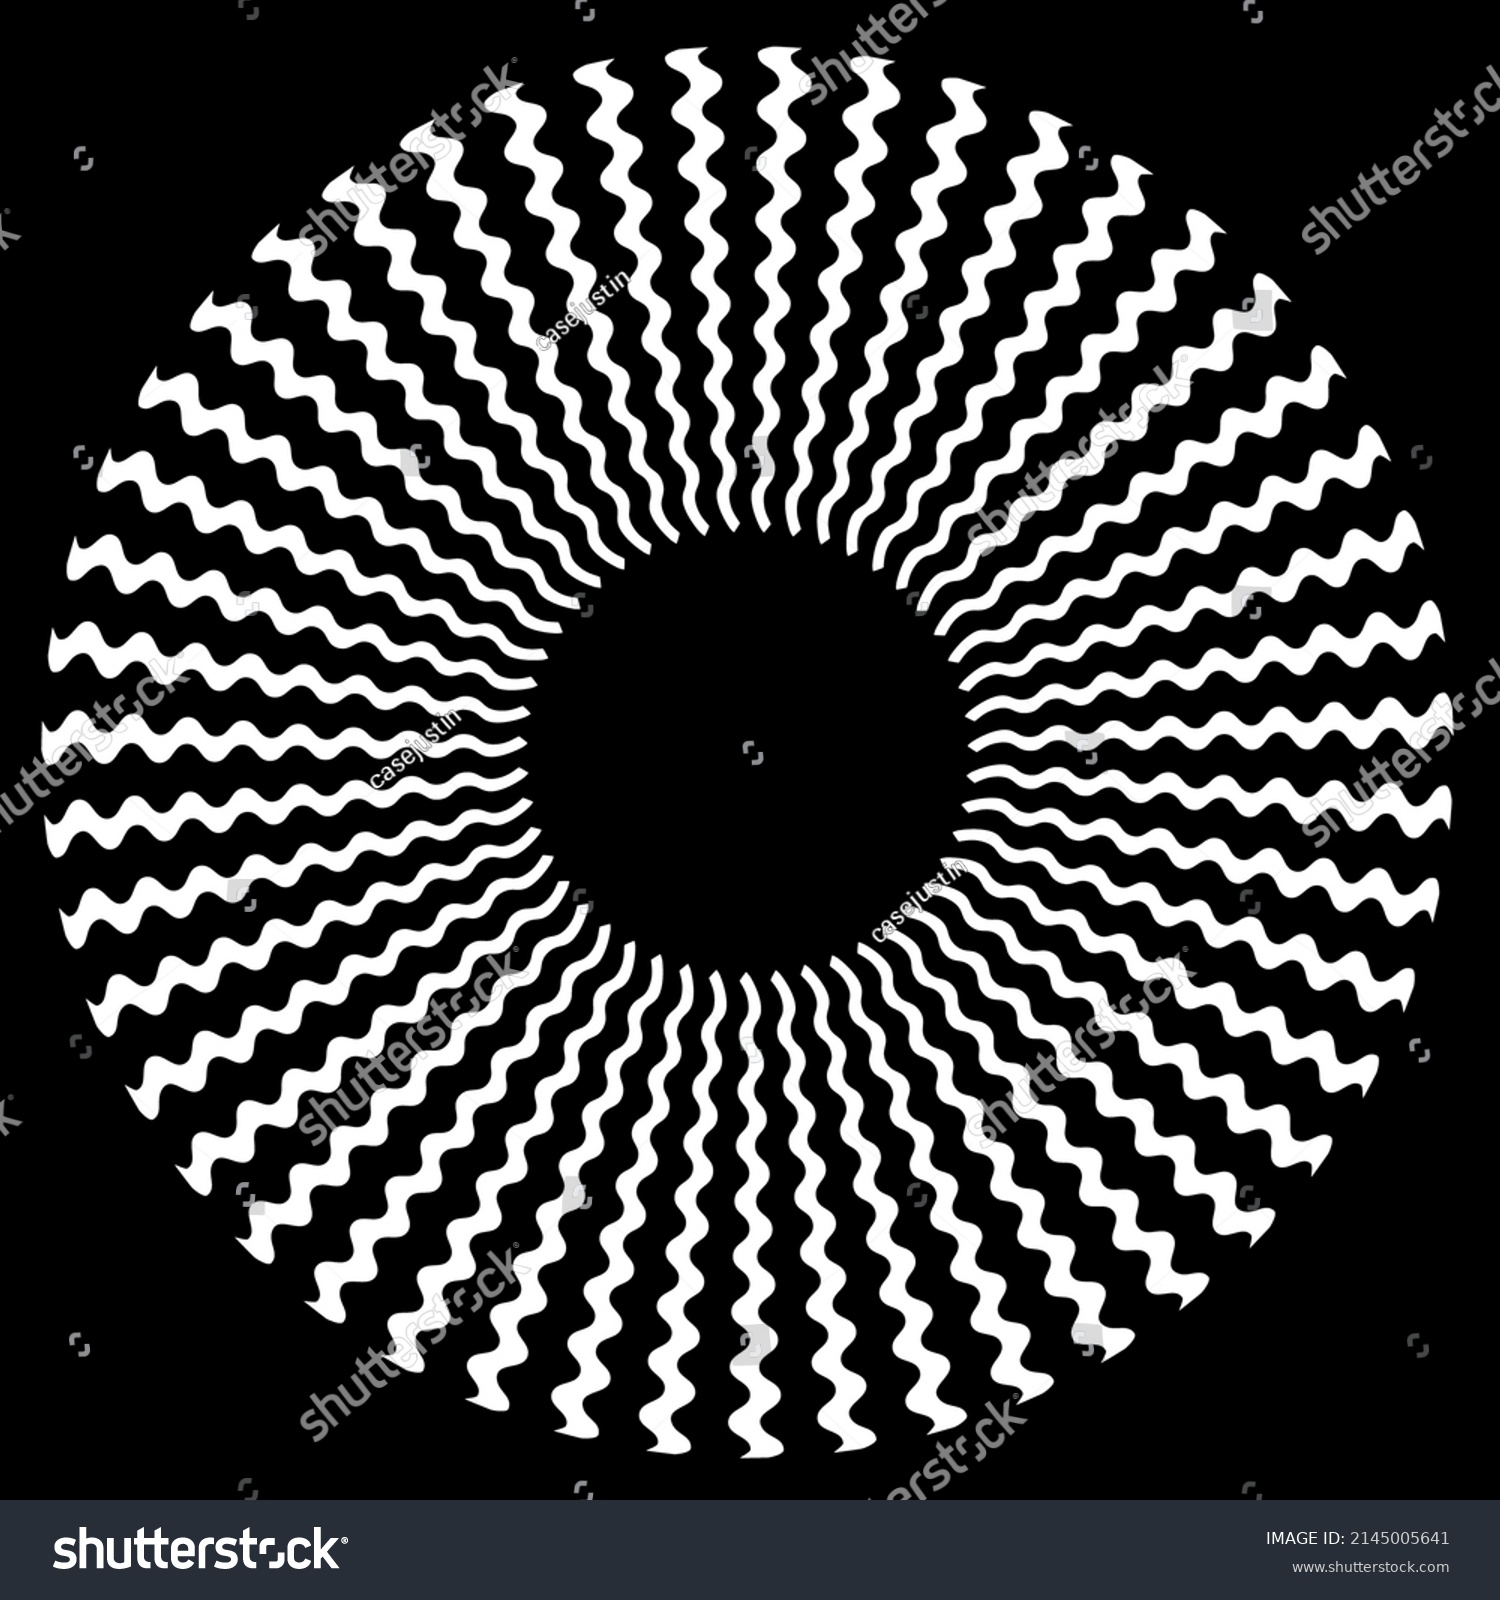 Zigzag, black and white abstract spiral design, zig zag swirl mandala, hypnosis, unconscious, stress, eye strain, optical illusion, vector includes pattern swatch that seamlessly fills any shape #2145005641